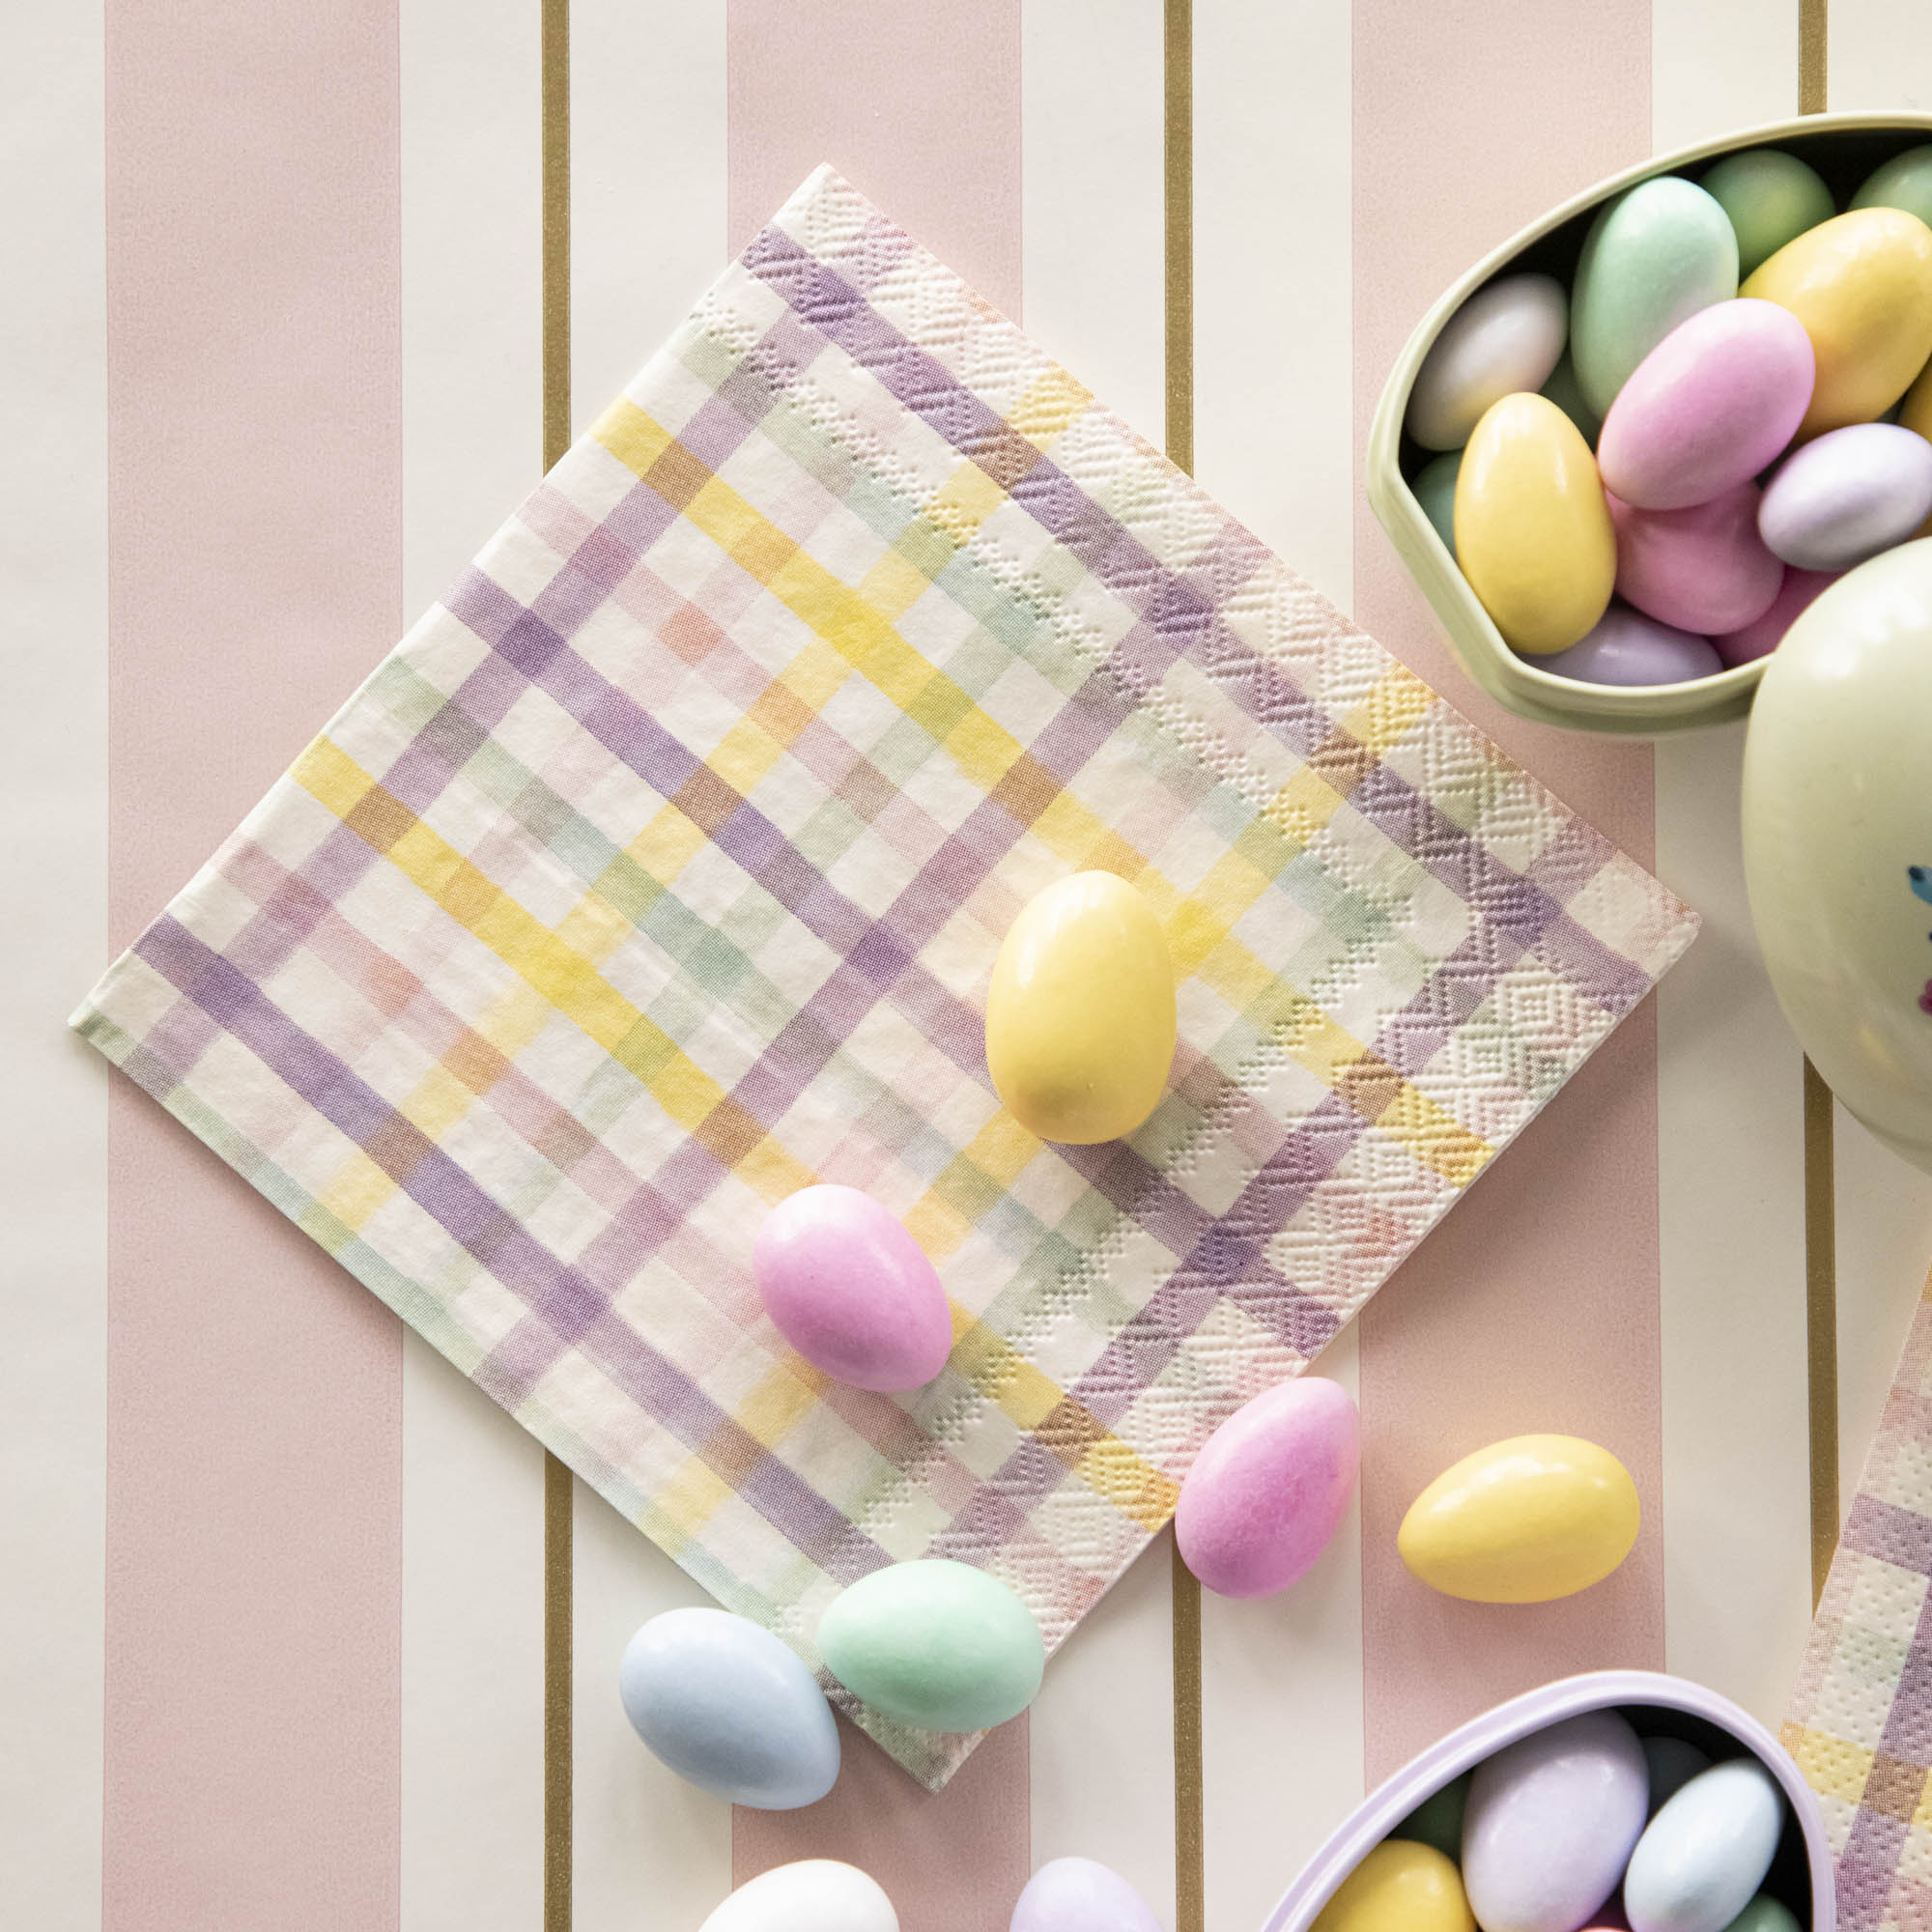 A Spring Plaid Cocktail Napkin with colorful Easter candies.